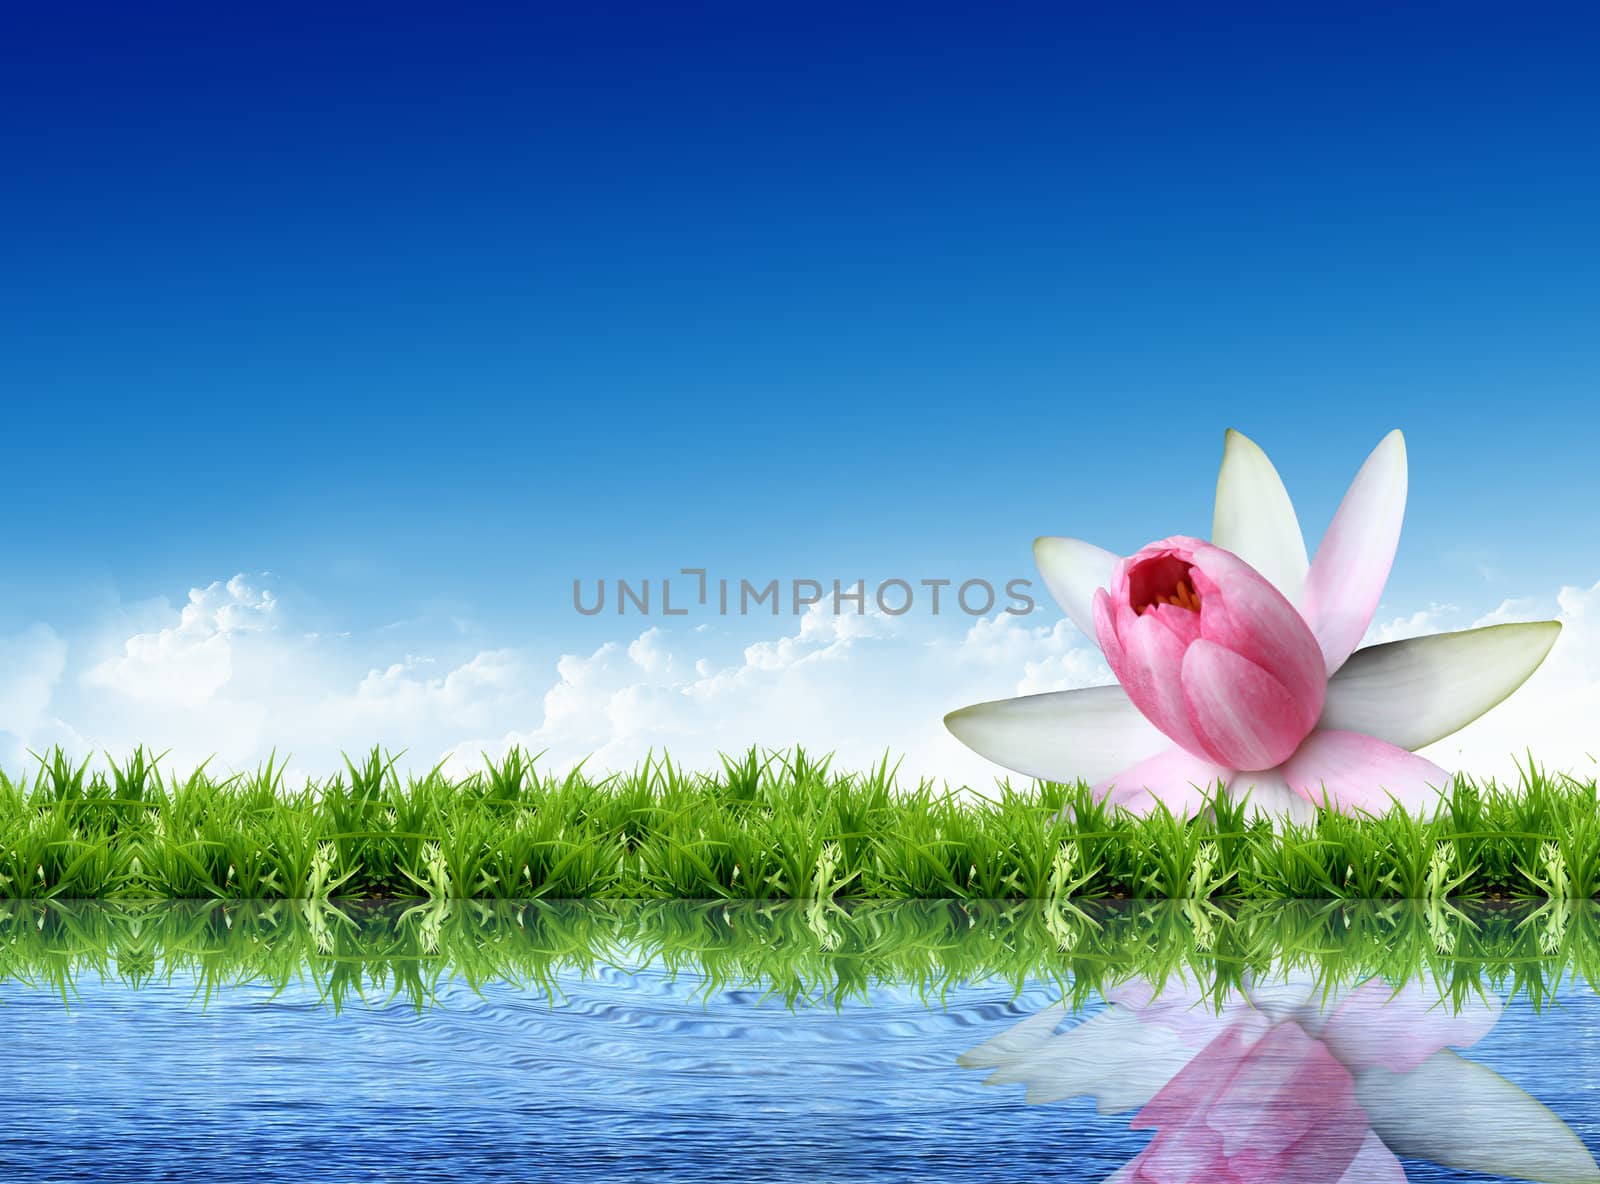 lotus on the grass with the bright sky
 by rufous